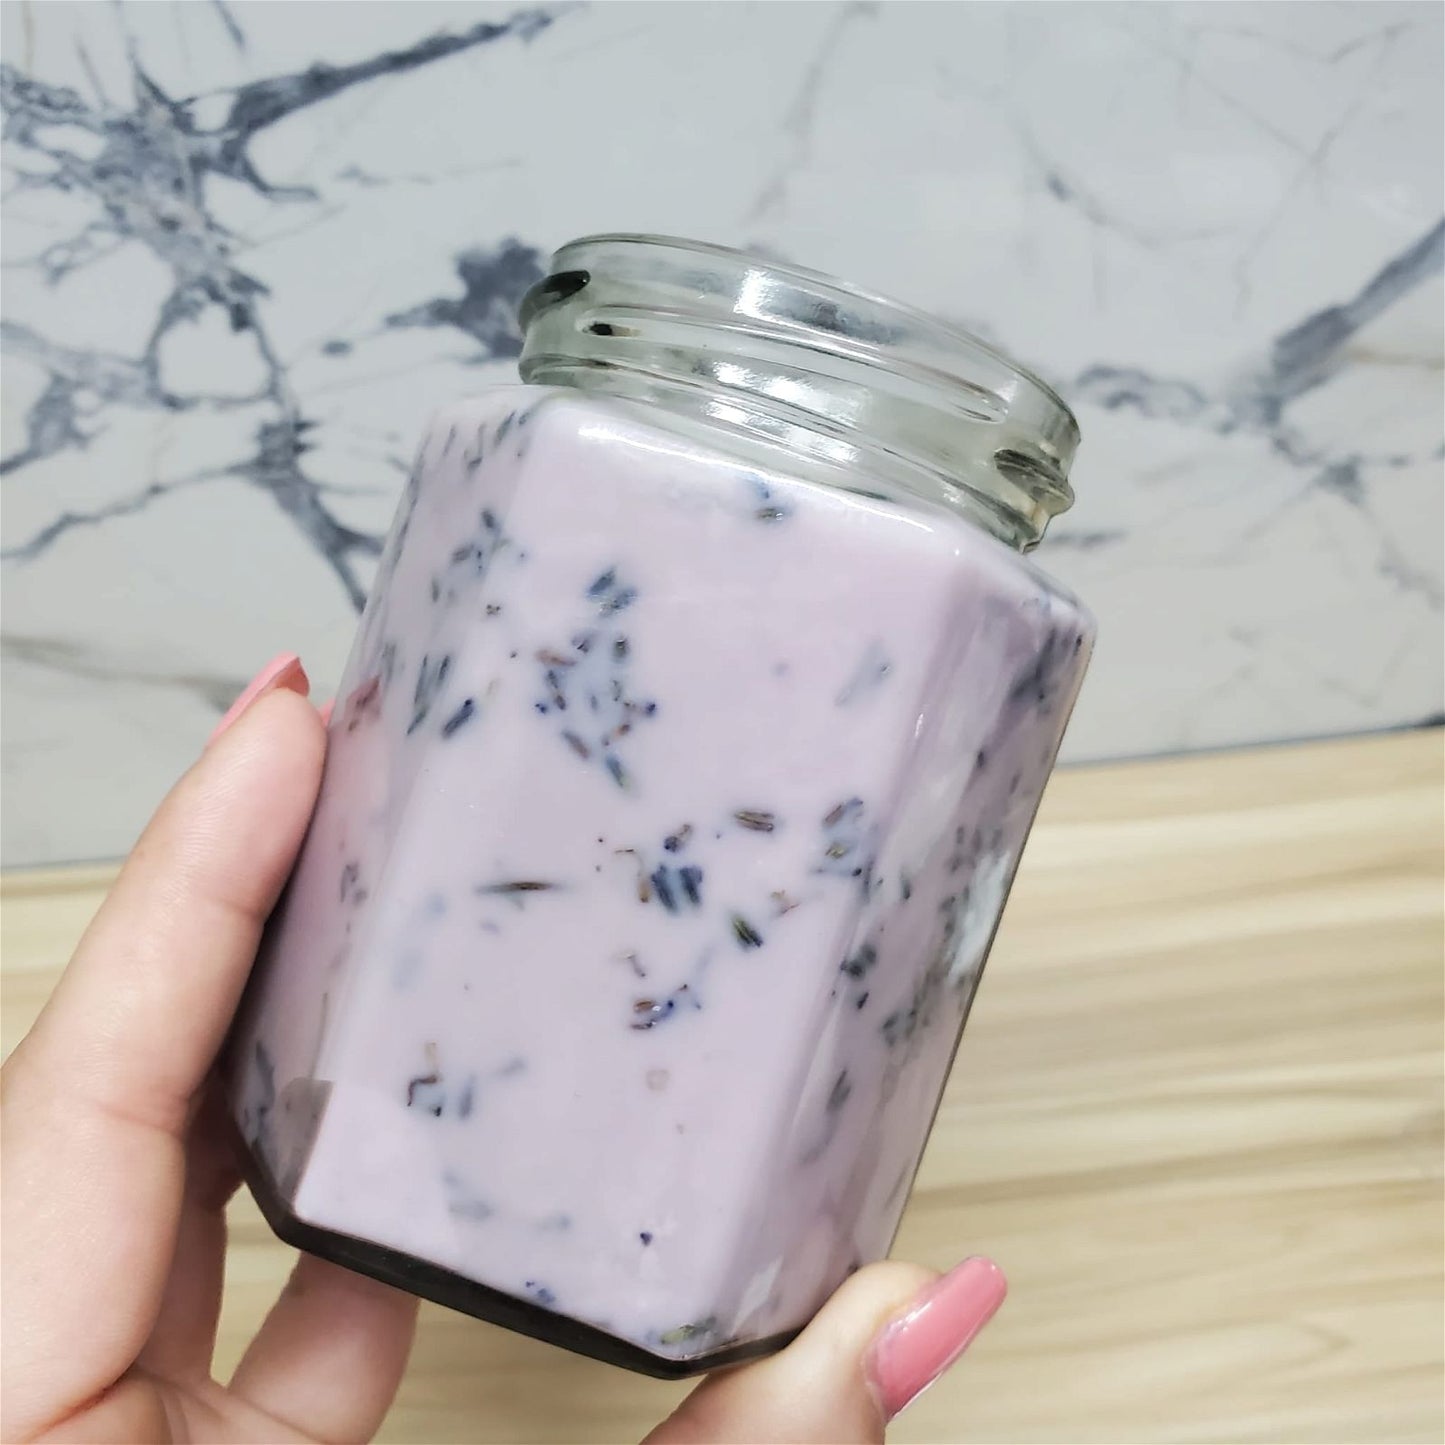 AROMATIC lavender Soy Candle | Large Hex Jar - D SCENT 